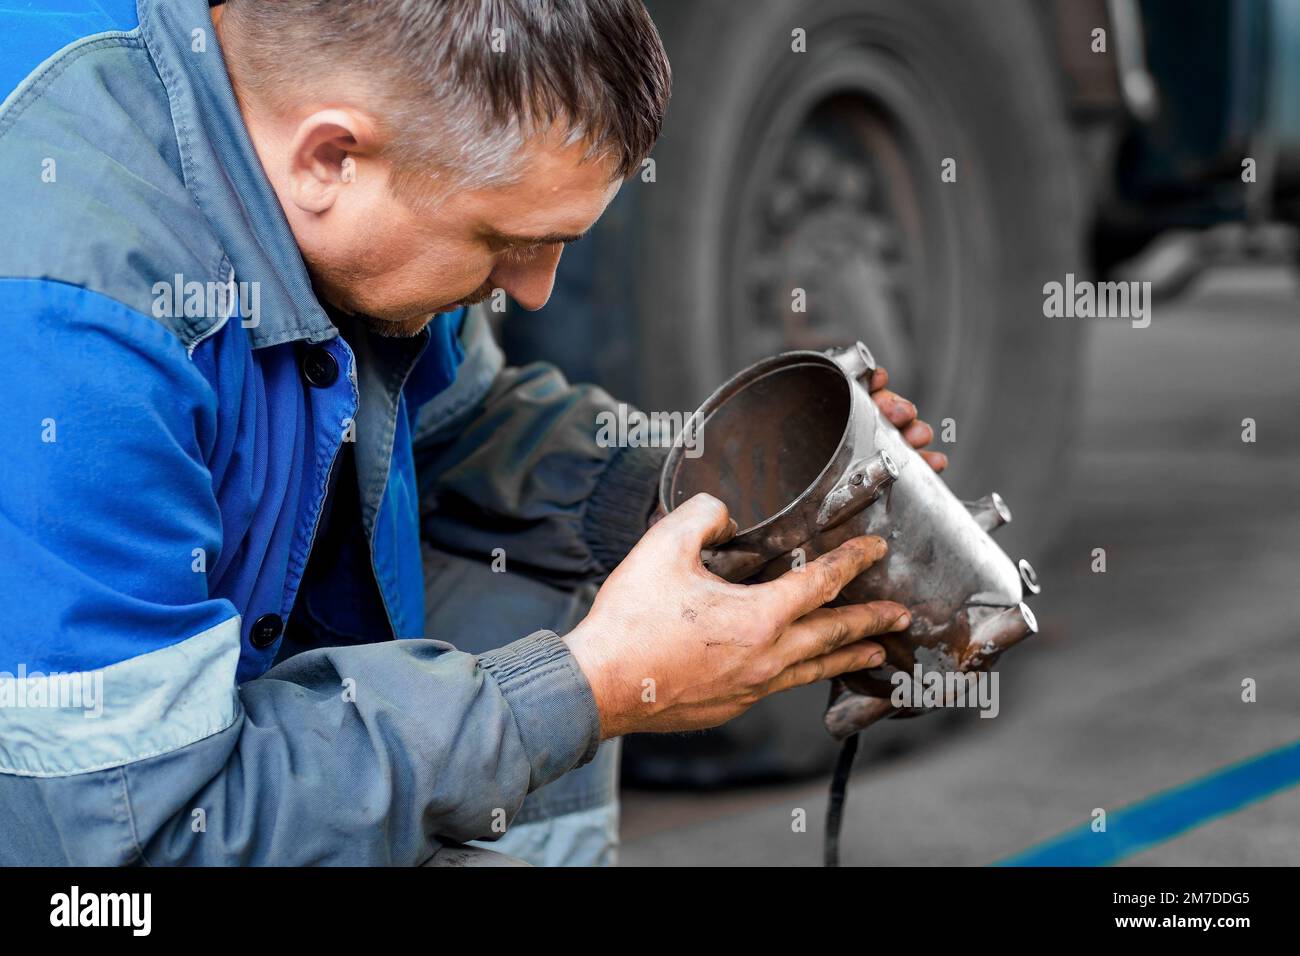 Auto mechanic repairs truck. Professional repair and diagnostics of cargo tractors and equipment. Mechanic in workshop considers spare parts.. Stock Photo